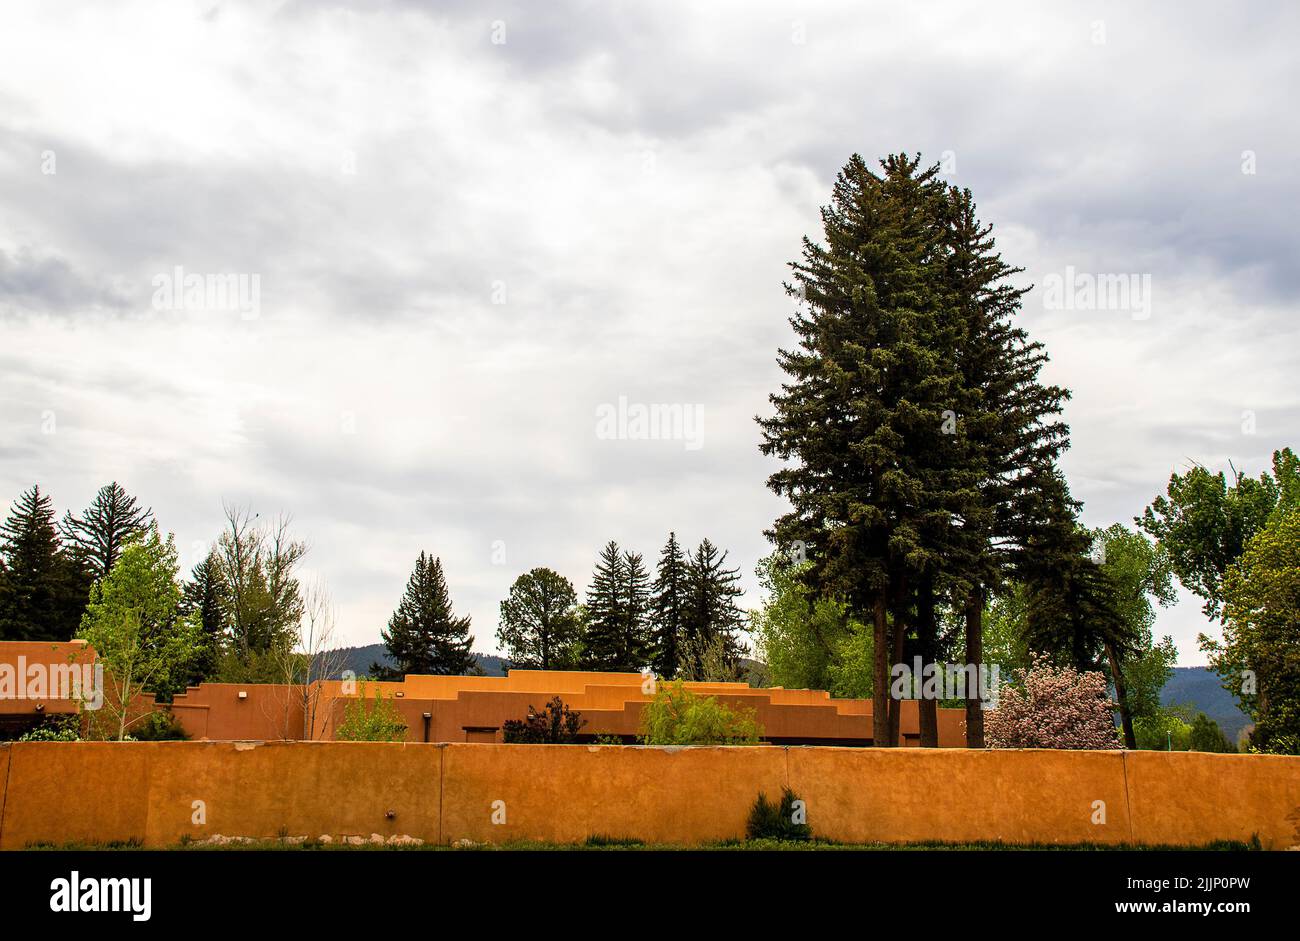 Orange stucco walls and buildings in Taos New Mexico USA with tall pine trees and blue mountains in the distance Stock Photo